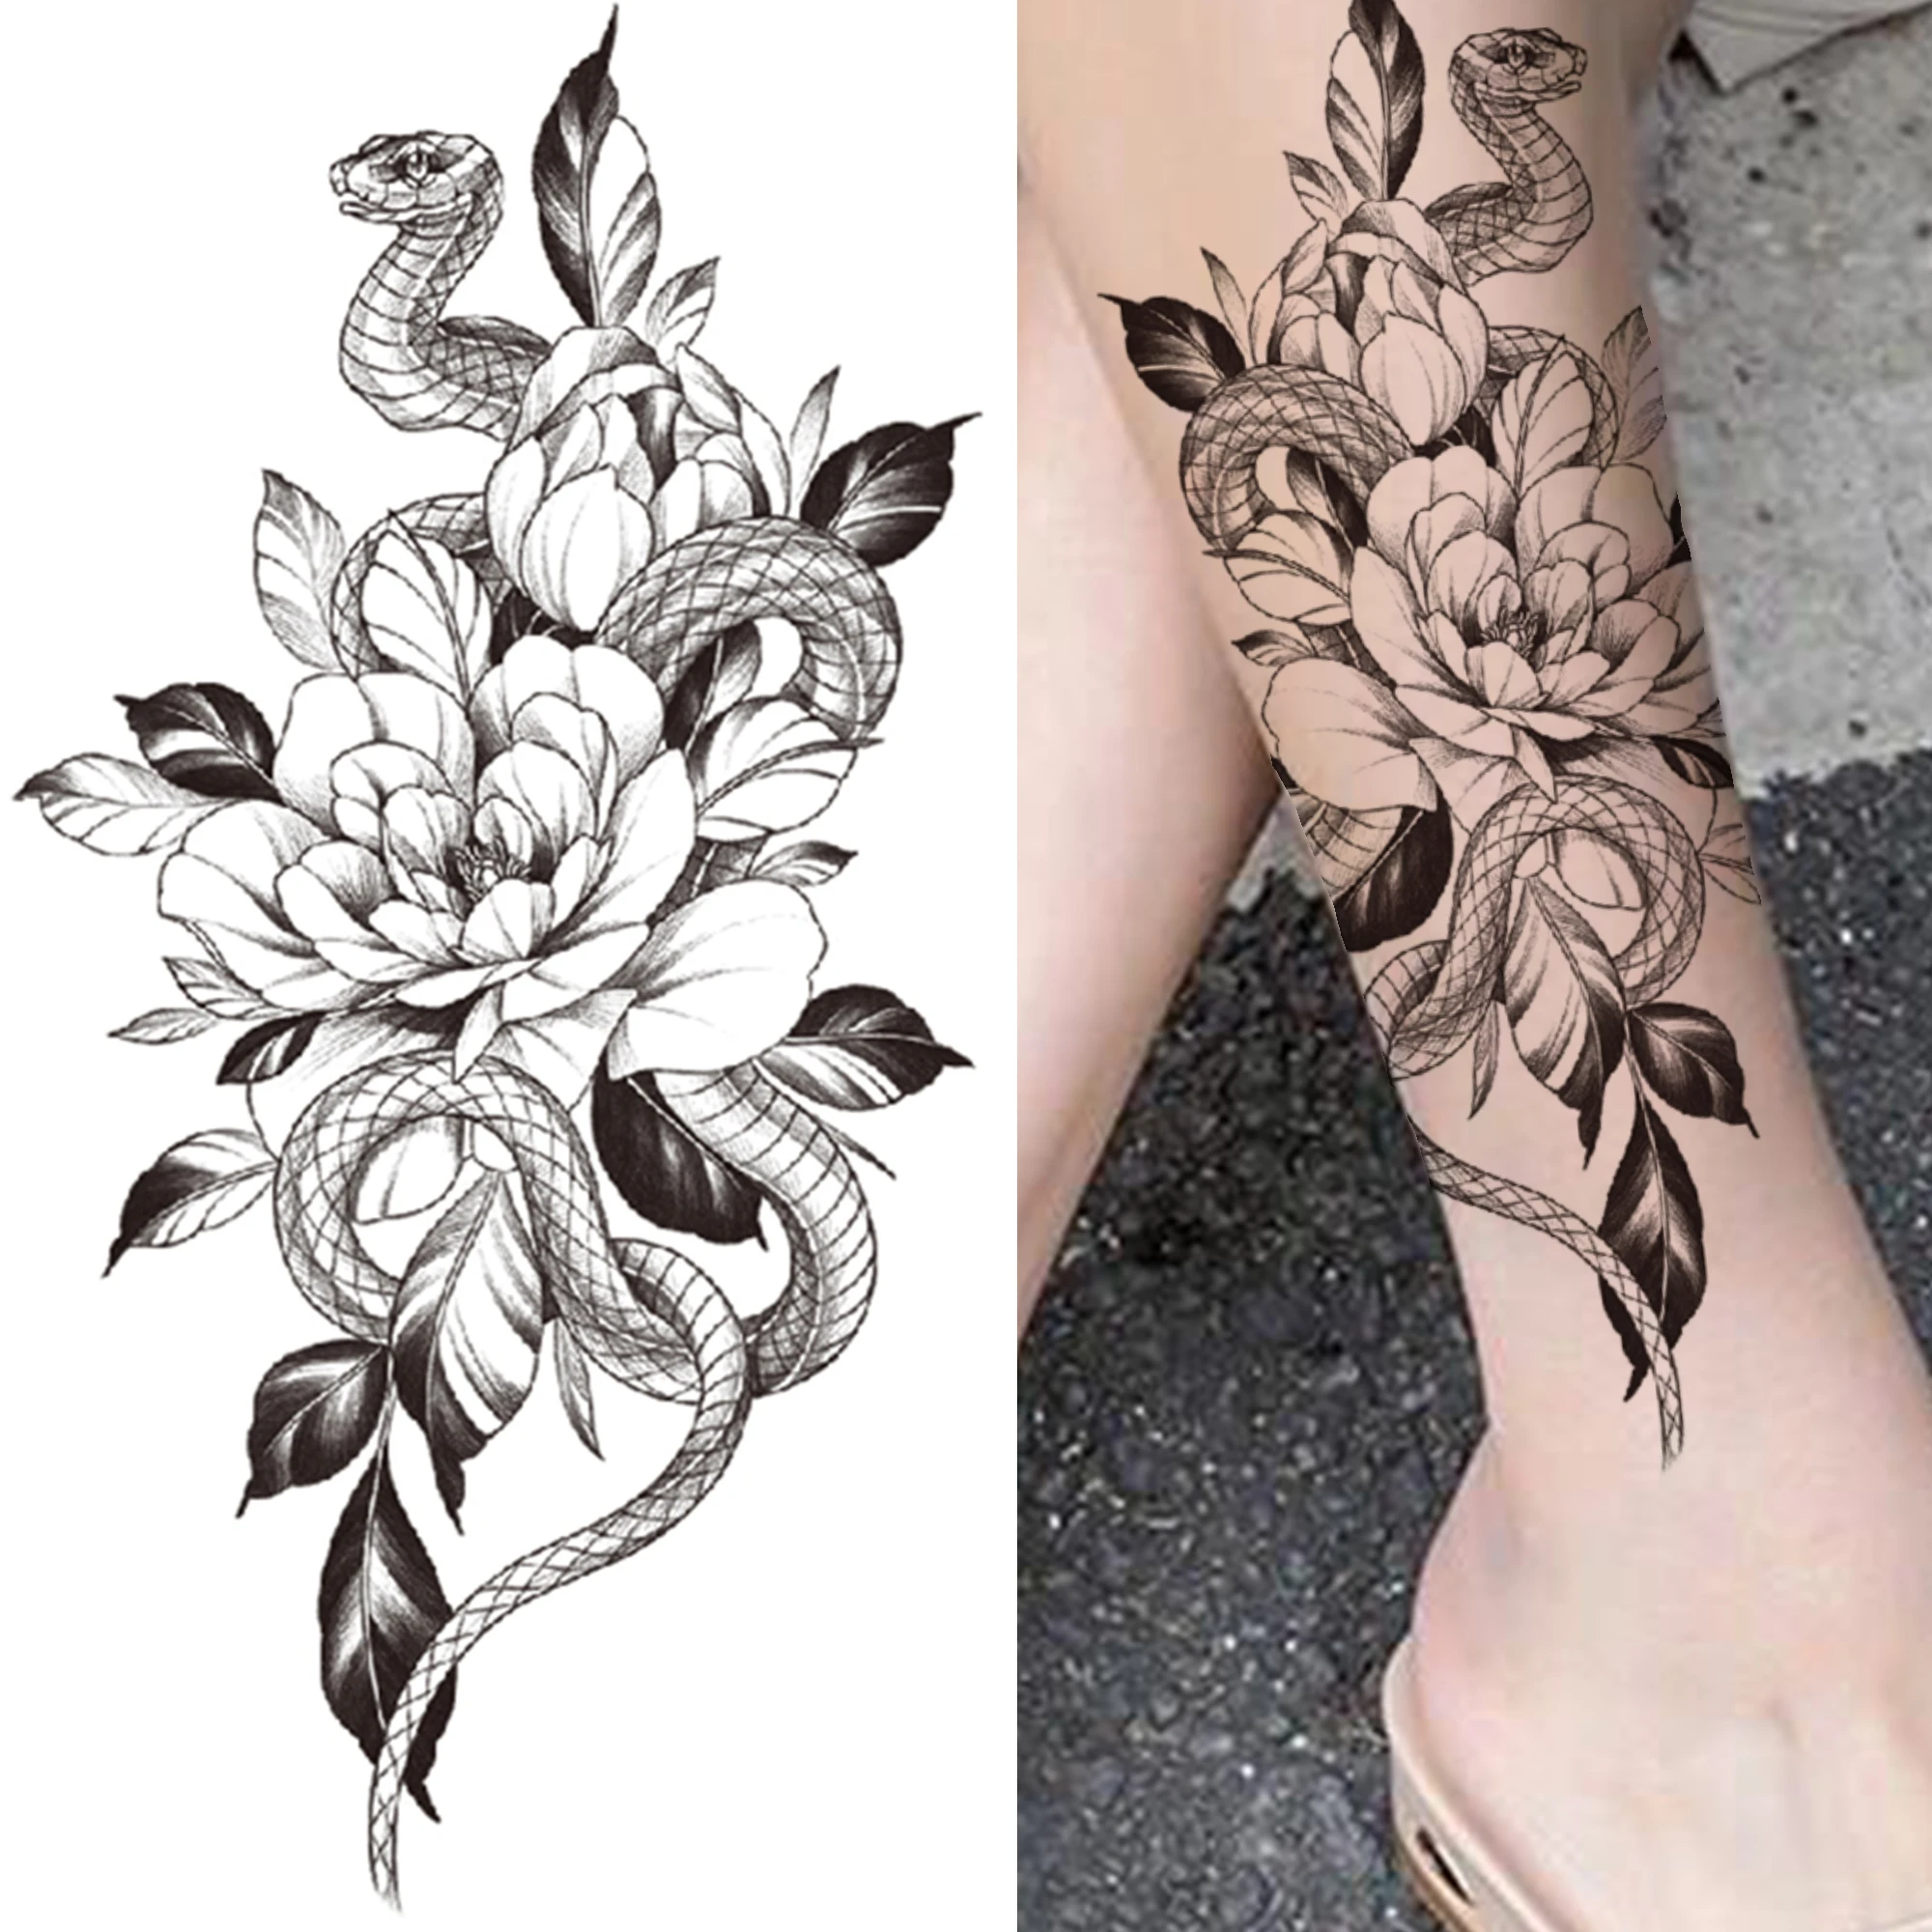 Briyhose 10 Sheet Realistic Floral Dragon Tattoo Temporary Thigh Tattoos  For Women Adults, Large 3D Color Black Flower Rose Dragon Sleeve Fake Arm